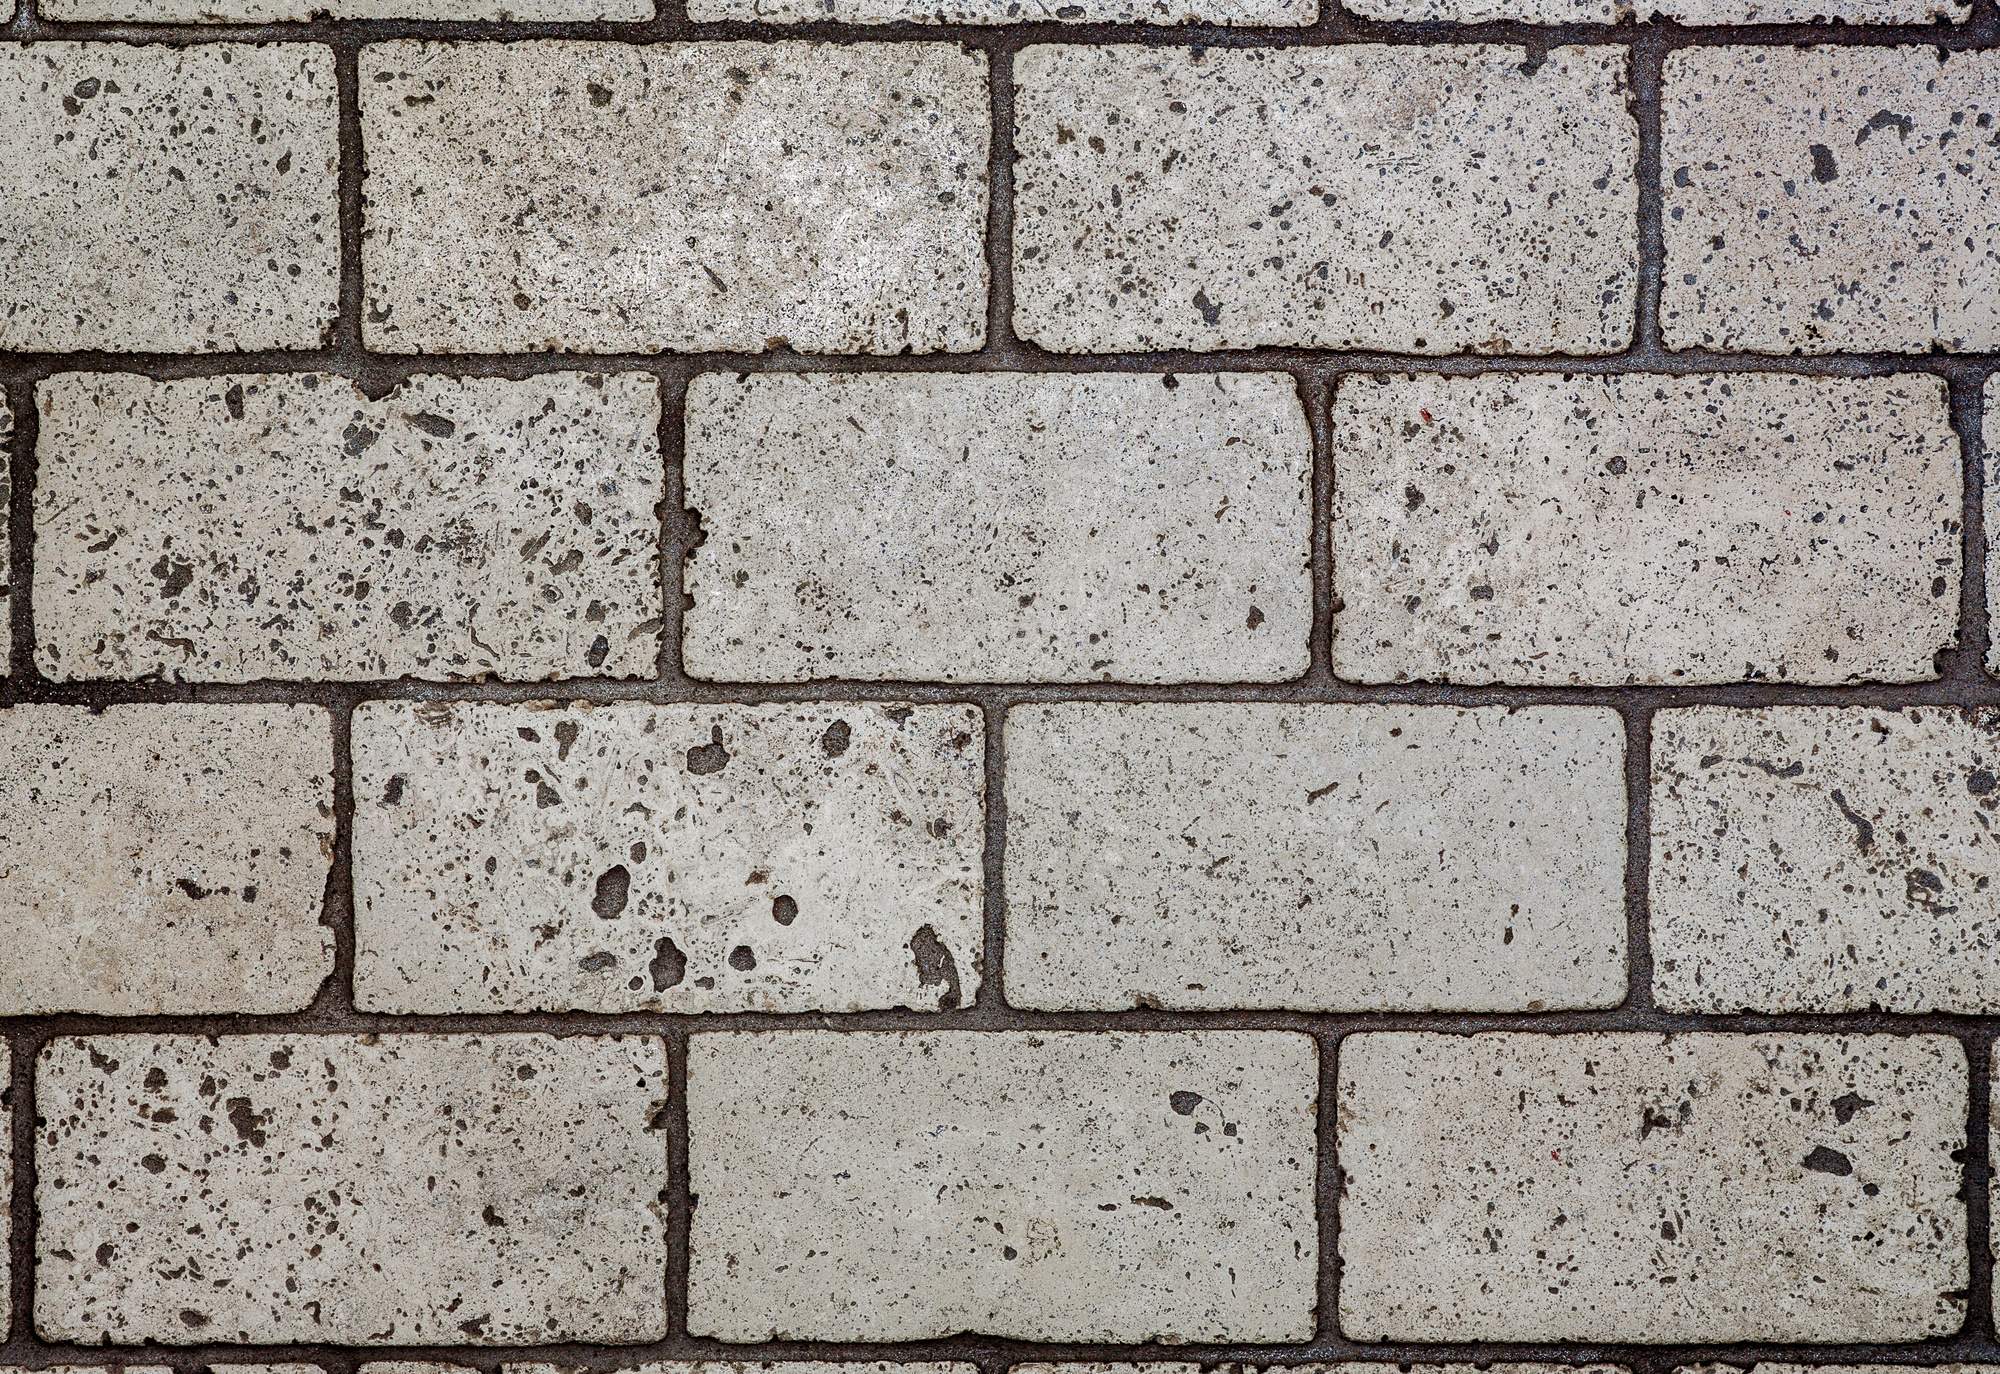 The Pros and Cons of a Patio Paver